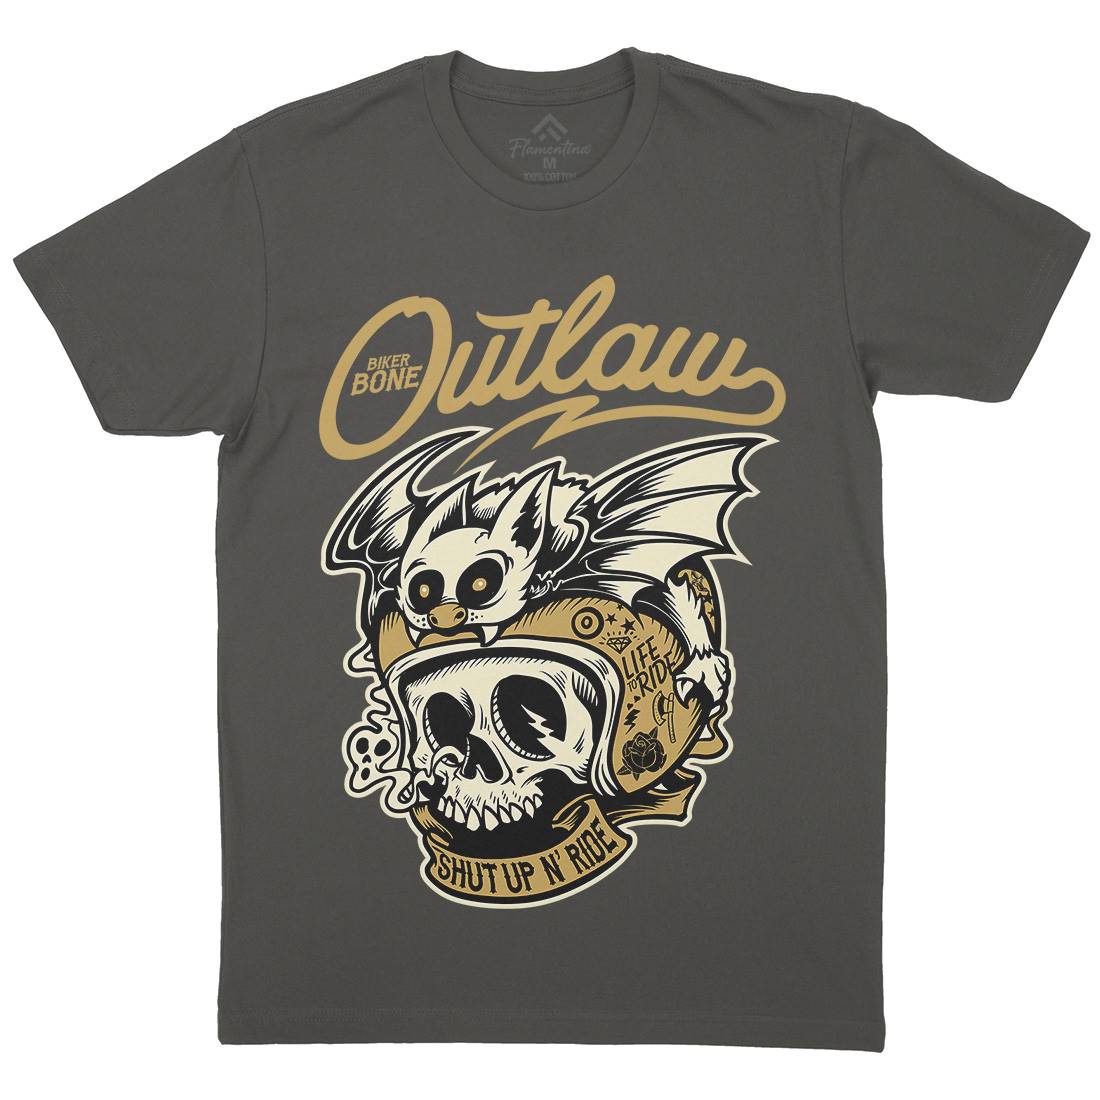 Outlaw Mens Crew Neck T-Shirt Motorcycles D063